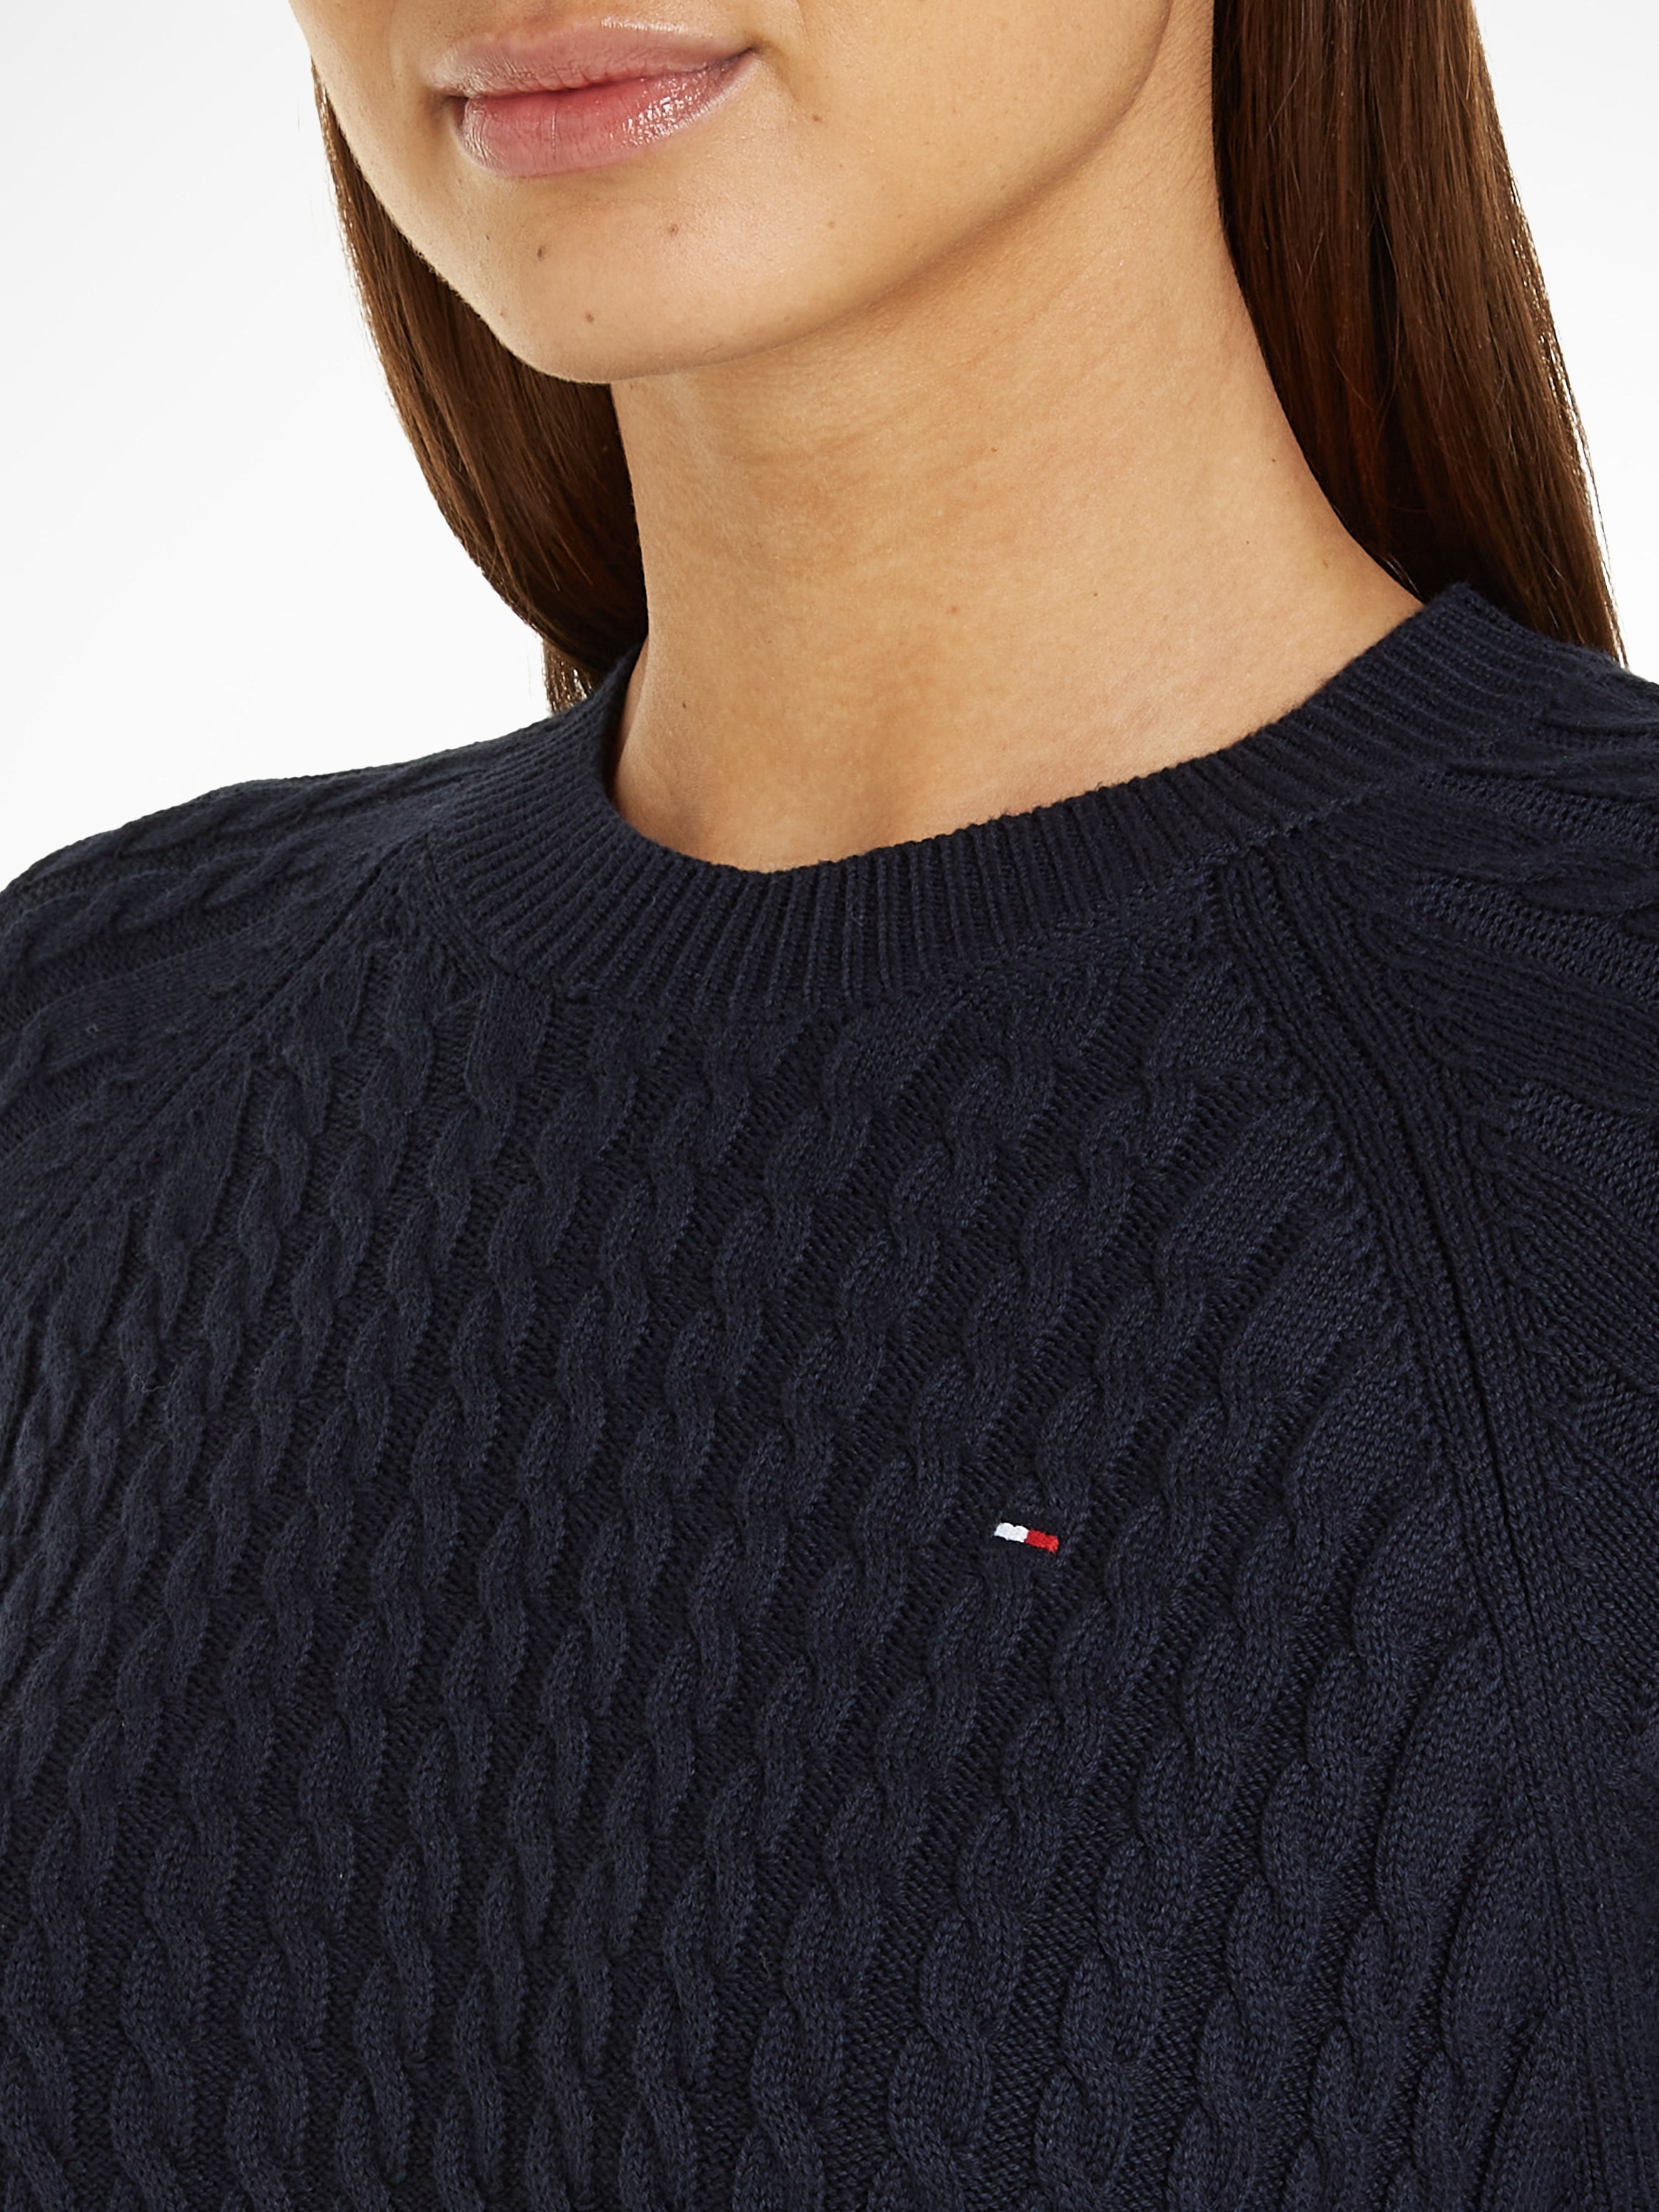 »CO mit SWEATER«, ♕ bei Hilfiger CABLE Rundhalspullover C-NK Zopfmuster Tommy